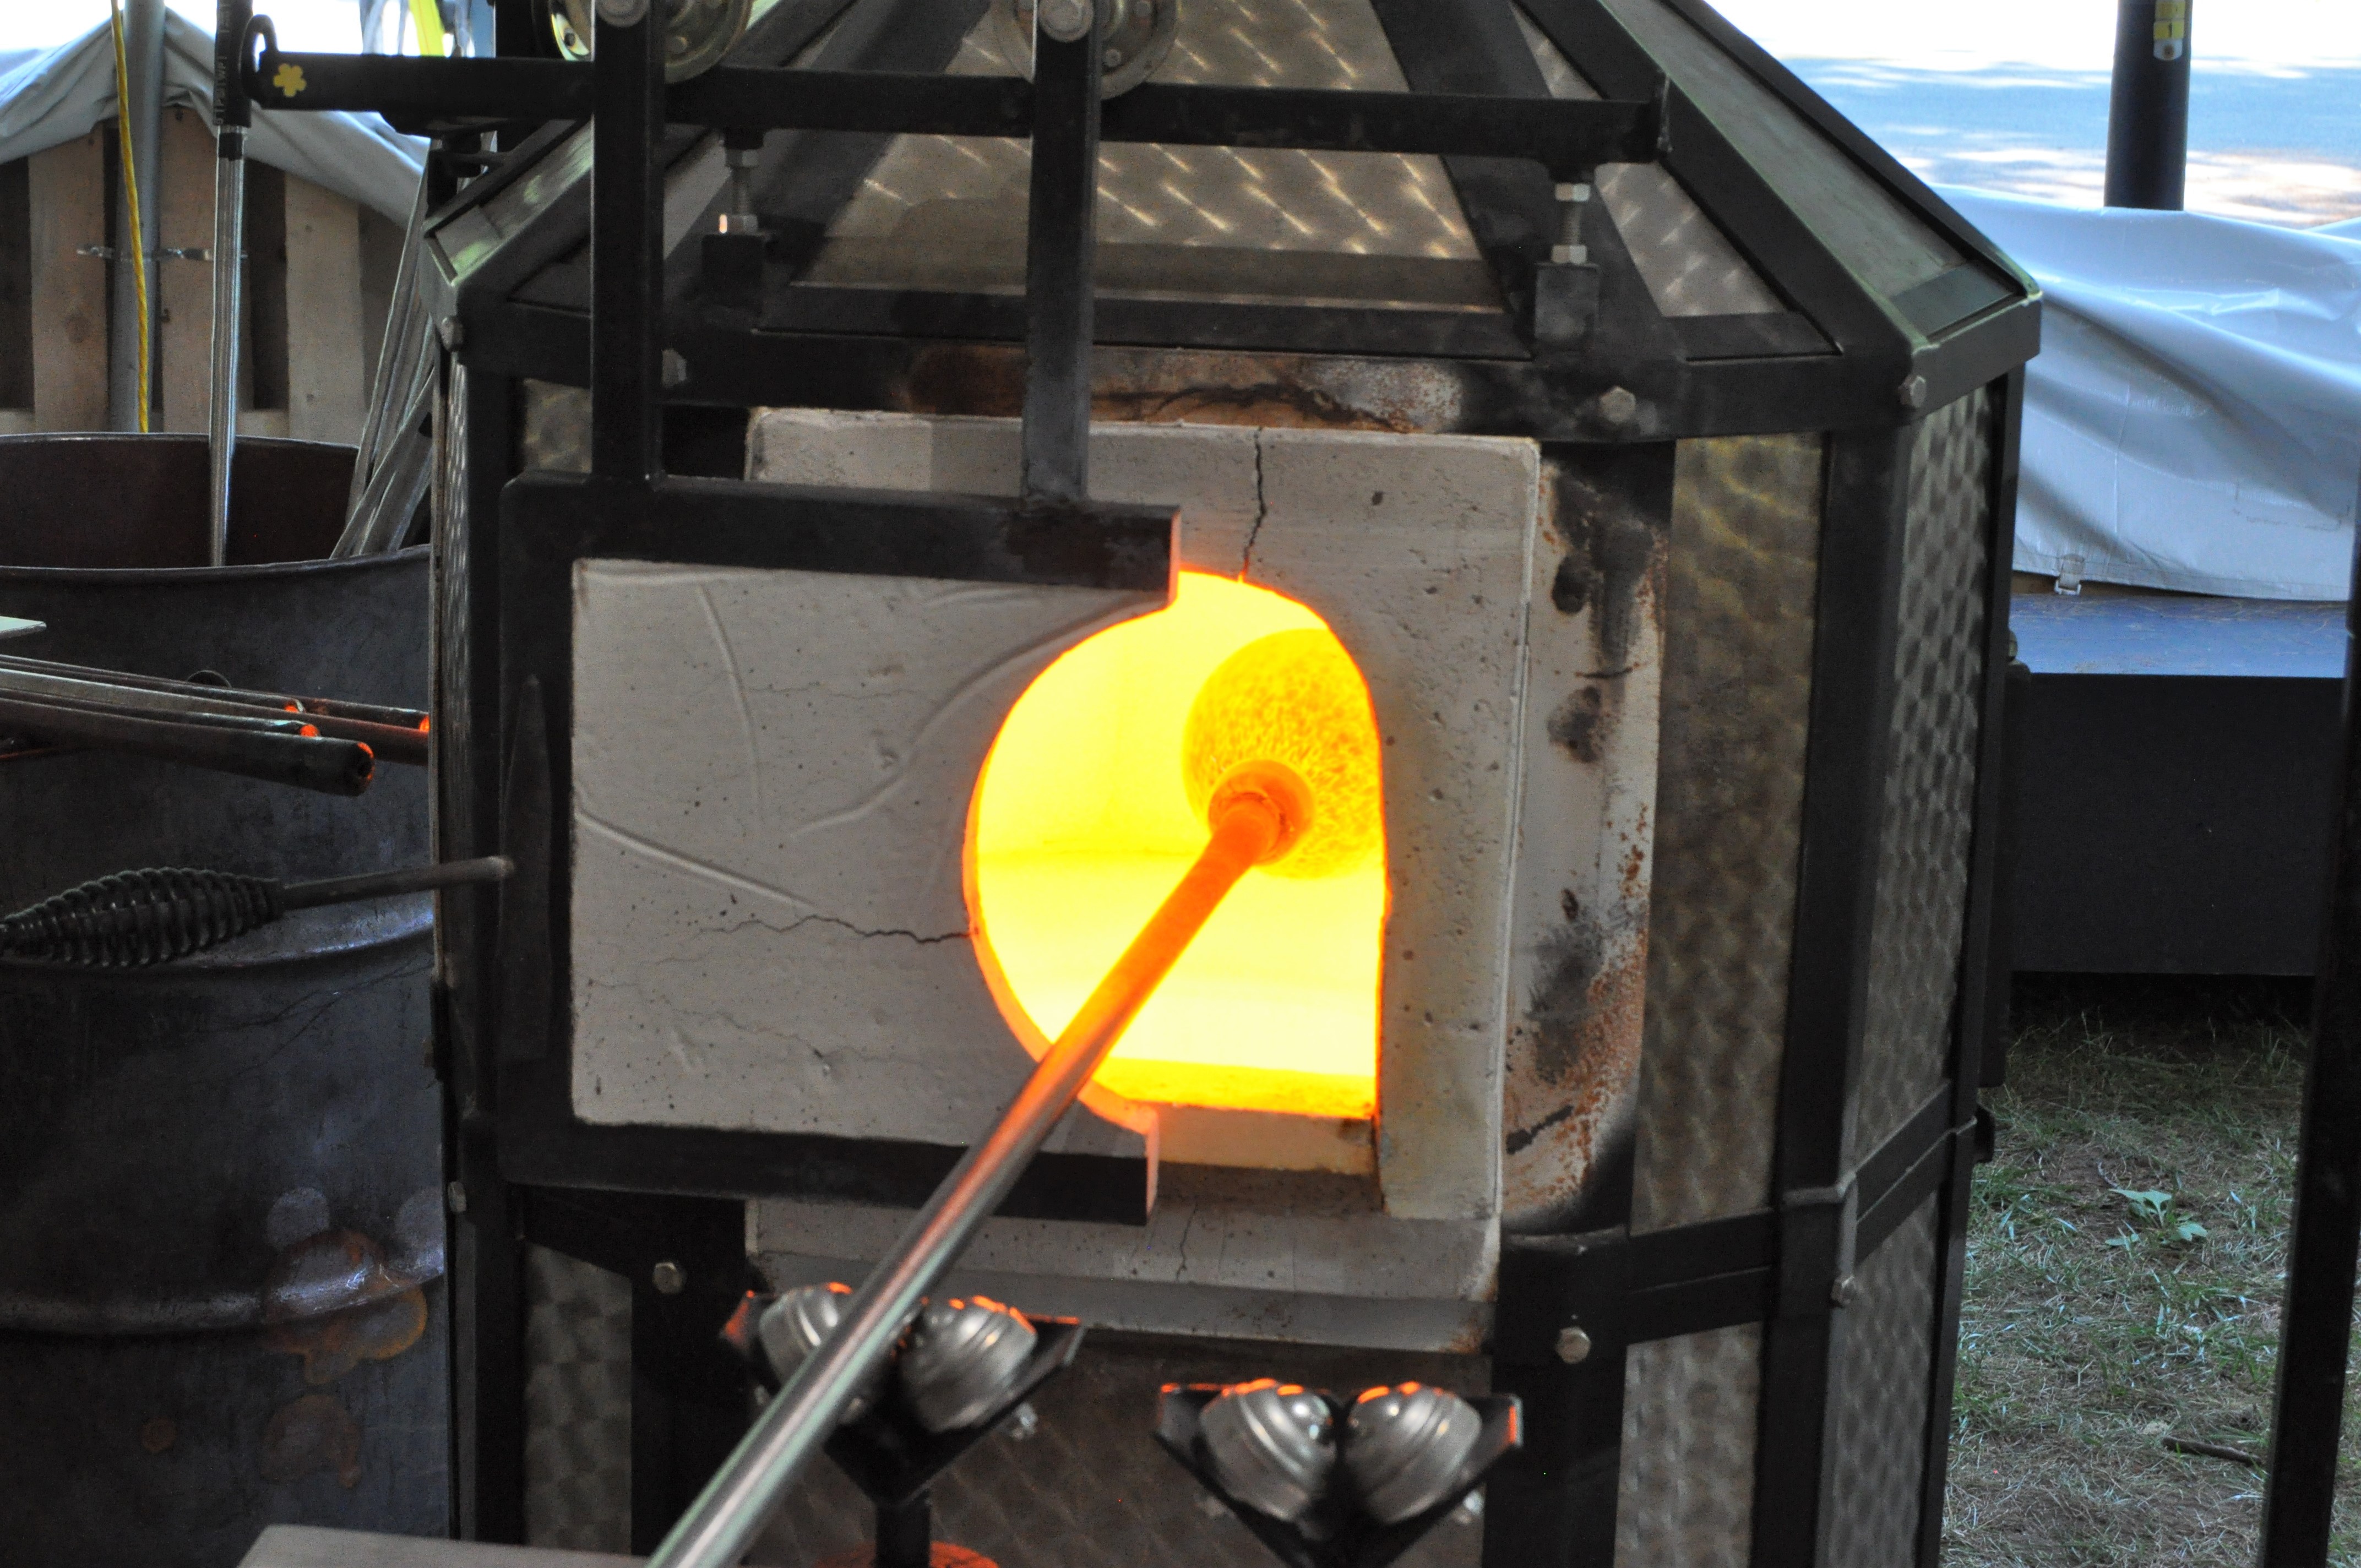 Glass piece inserted into the furnace at the end of the tube